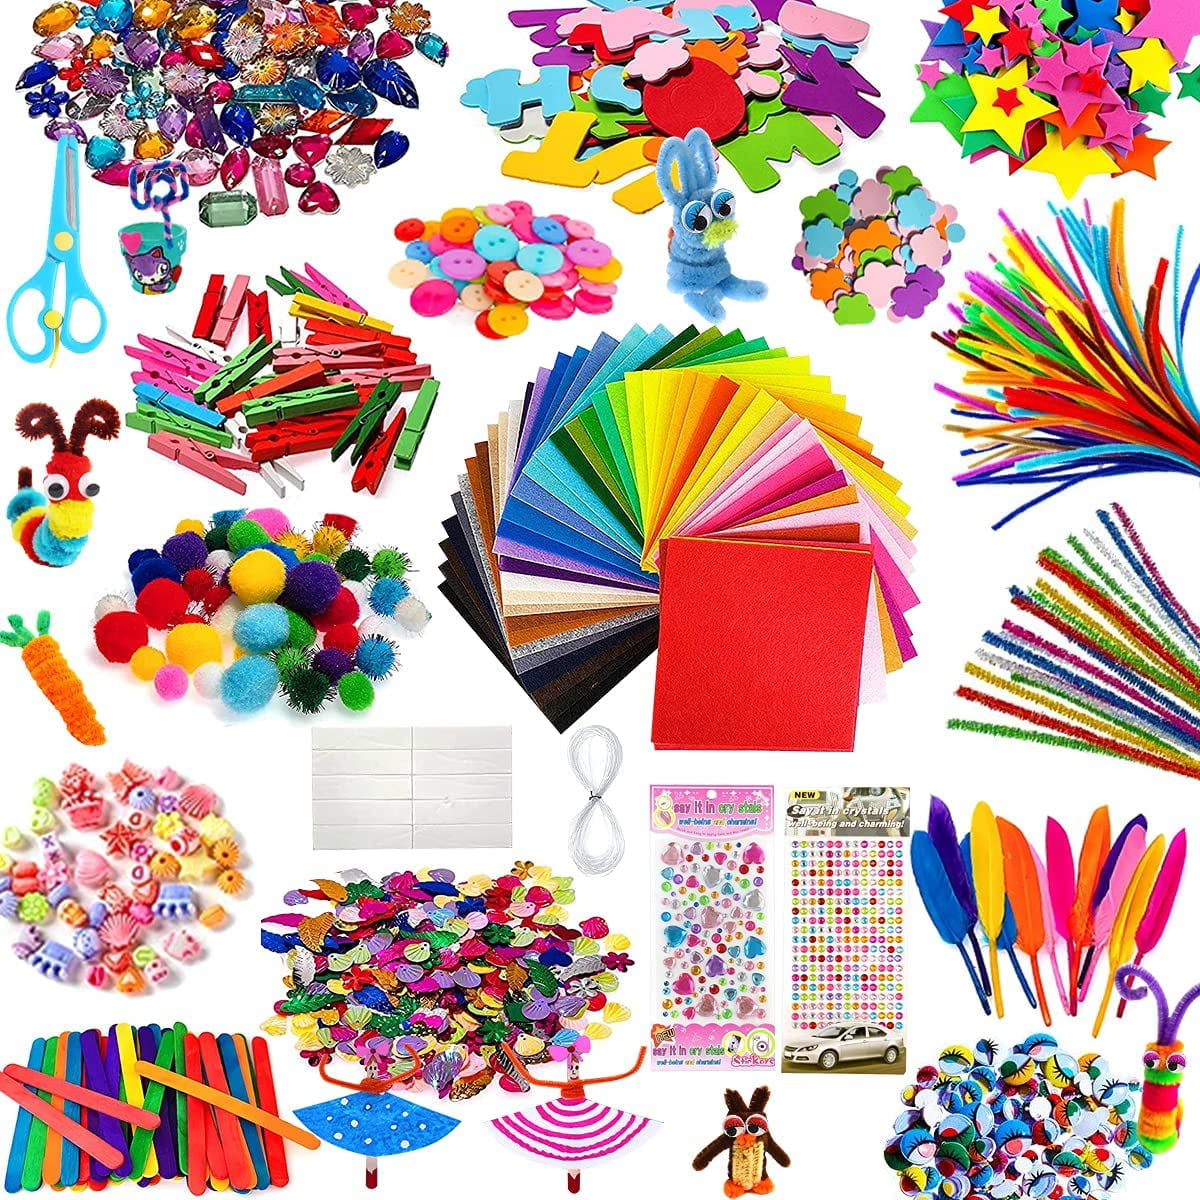 Zlulary Upgraded Art and Craft Supplies for Kids, Craft Supplies, Craft Kit  with Manual, Pipe Cleaners Craft Supplies, Pom poms, Storage Box, Arts and